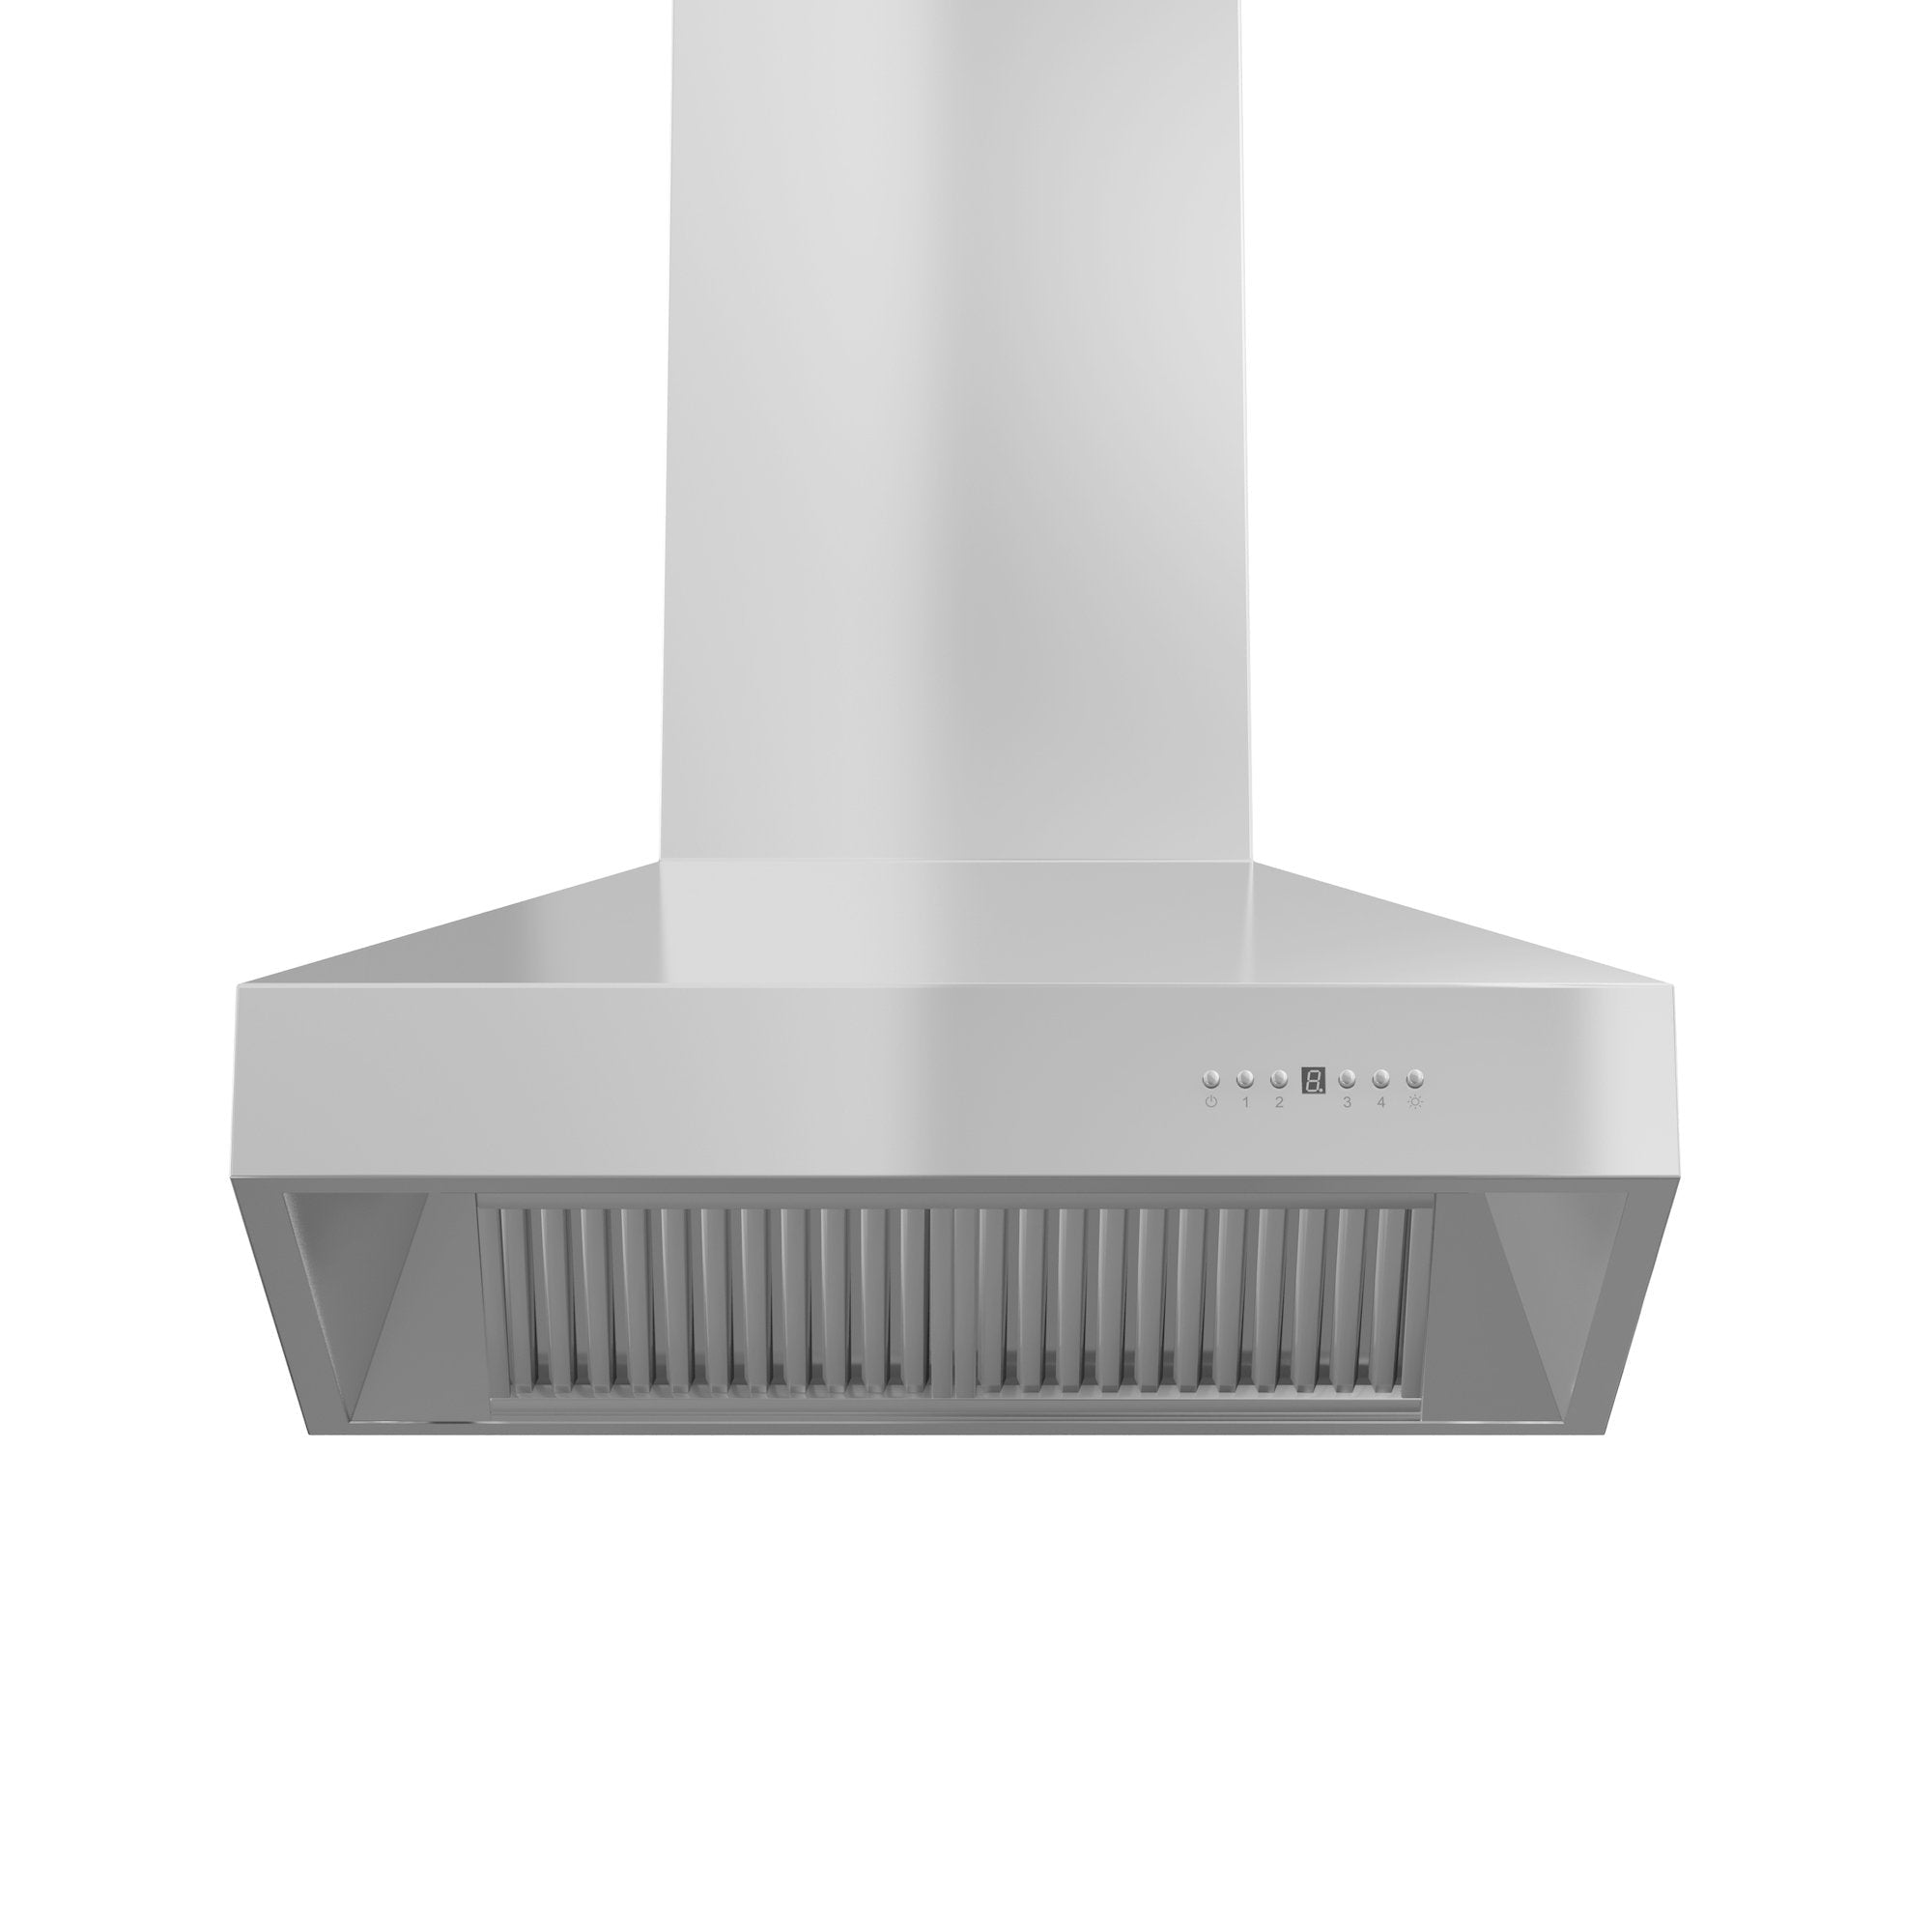 ZLINE Professional Convertible Vent Wall Mount Range Hood in Stainless Steel with Crown Molding (667CRN) front, under.